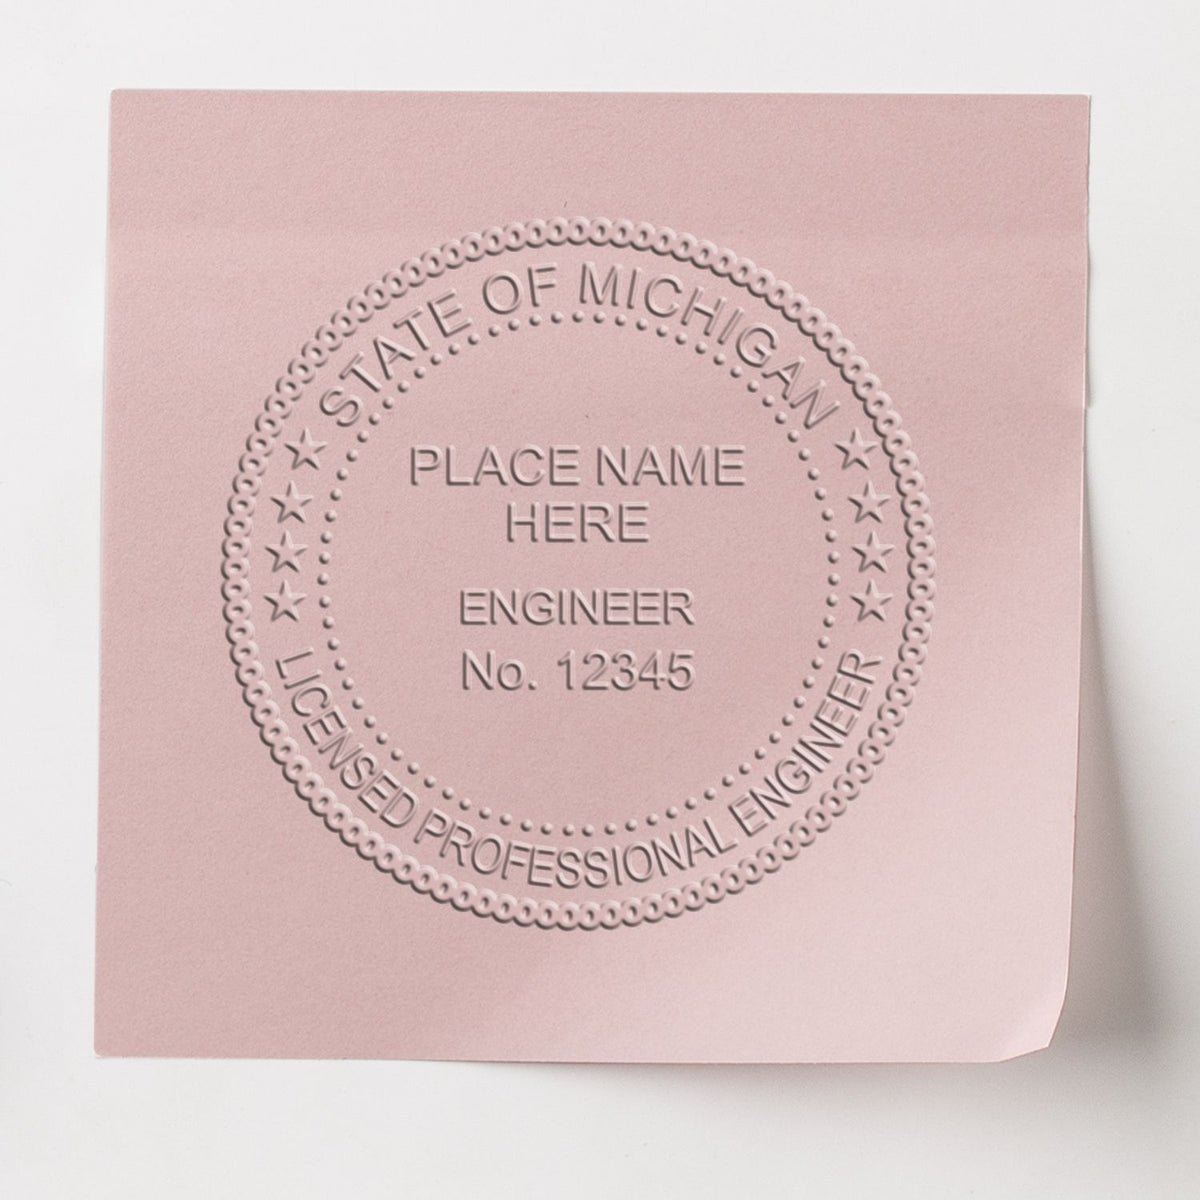 This paper is stamped with a sample imprint of the Michigan Engineer Desk Seal, signifying its quality and reliability.